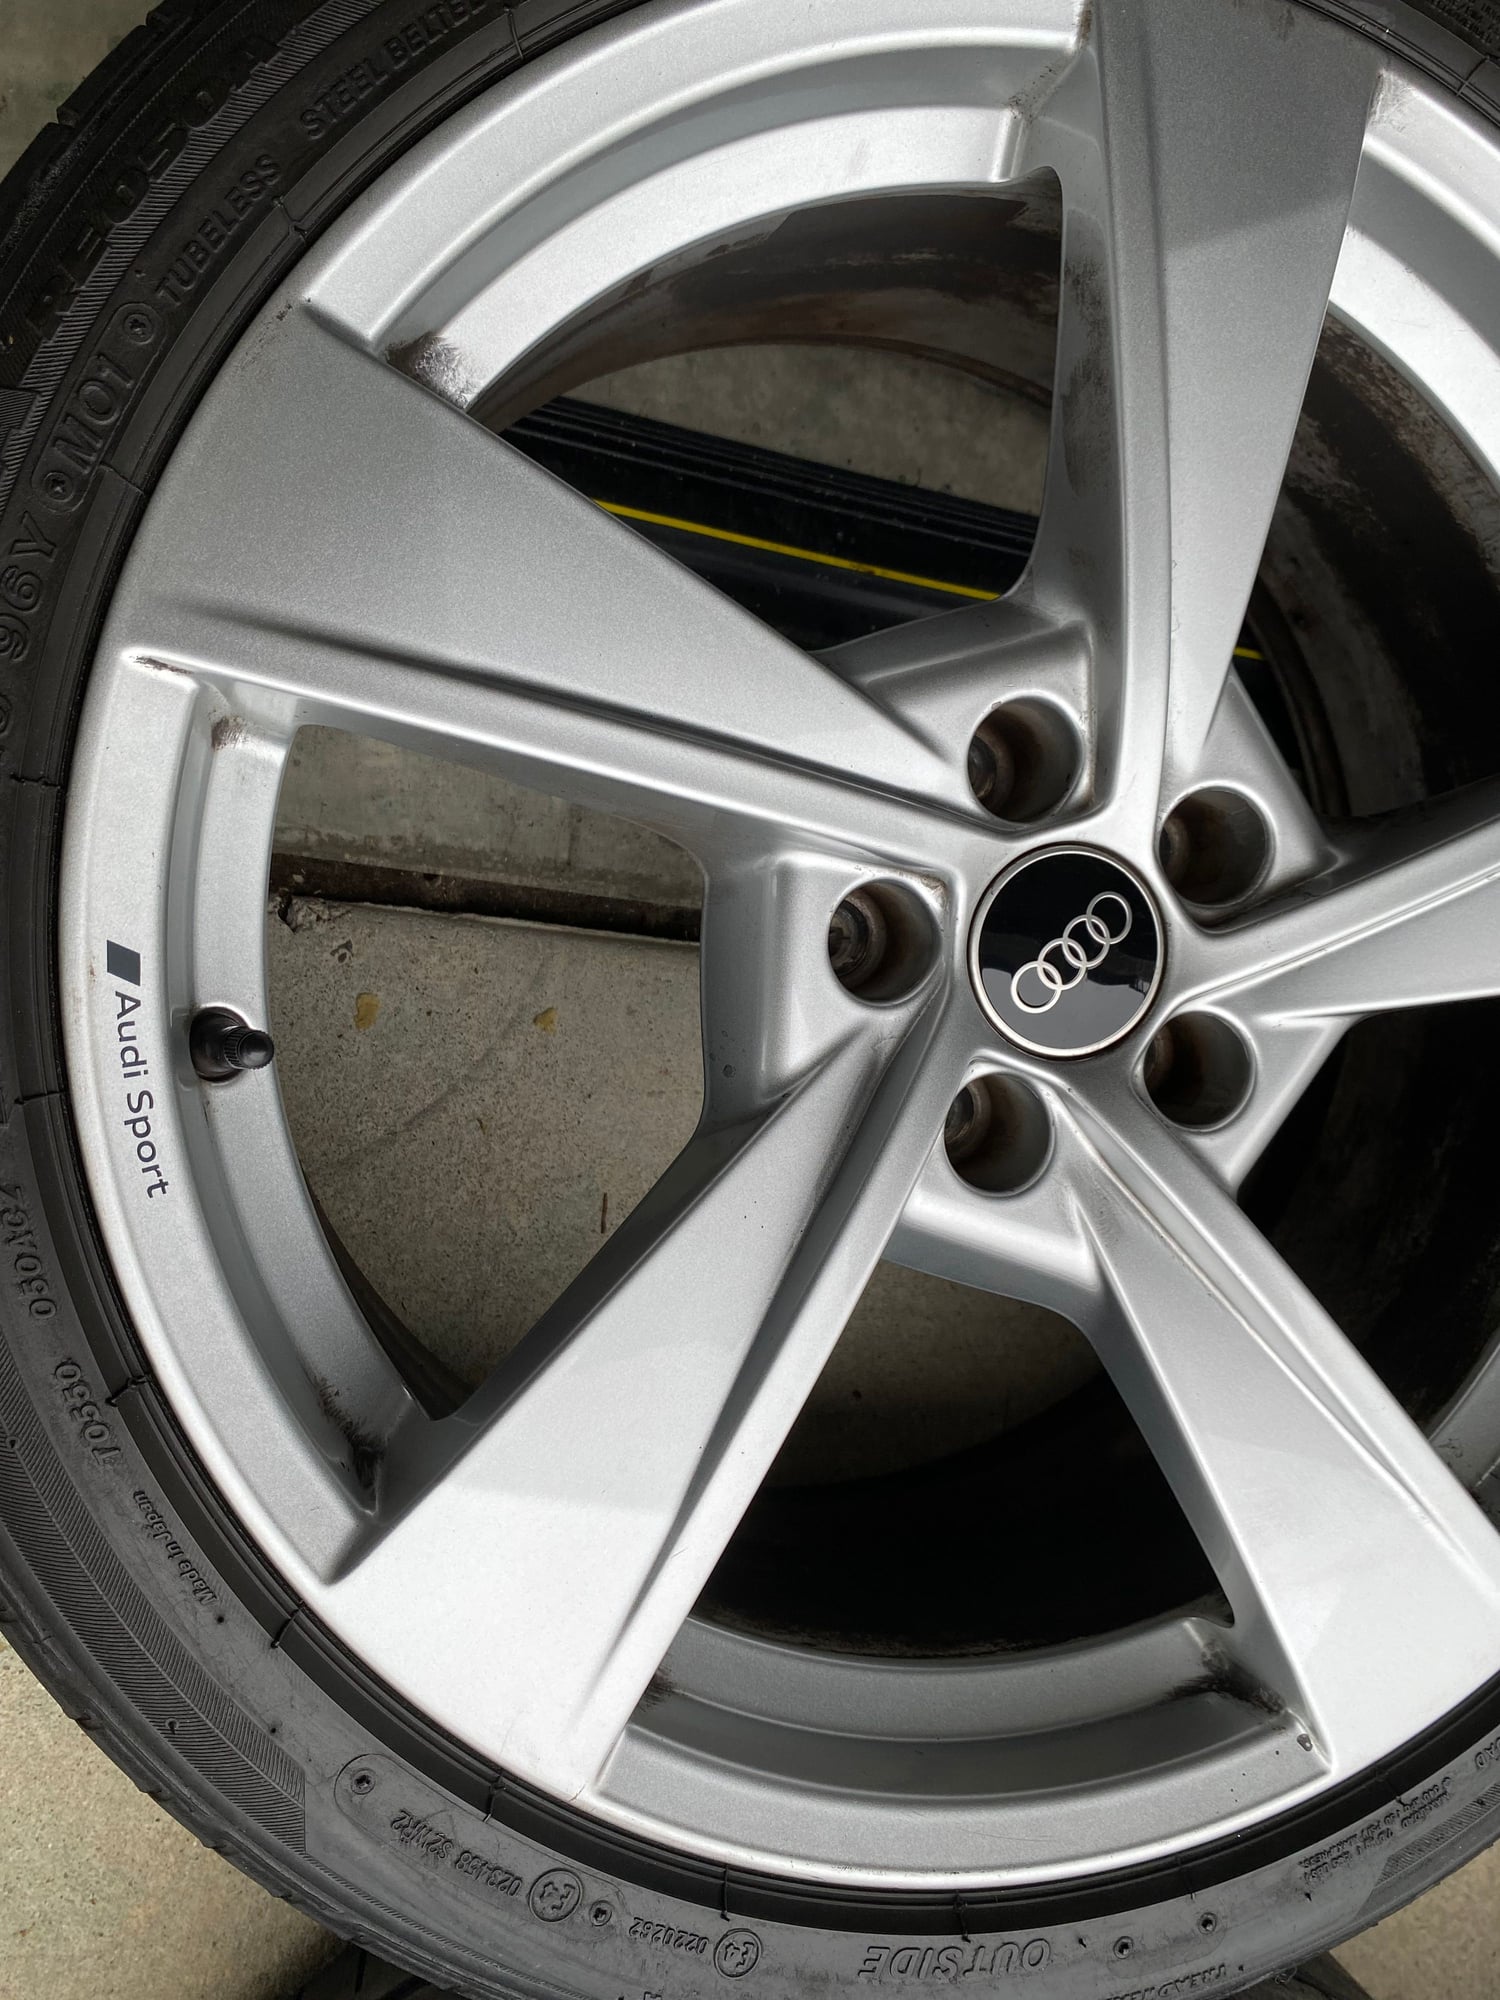 Wheels and Tires/Axles - OEM Audi S4 19" Rotor Wheels - Used - 2022 Audi S4 - Simi Valley, CA 93065, United States